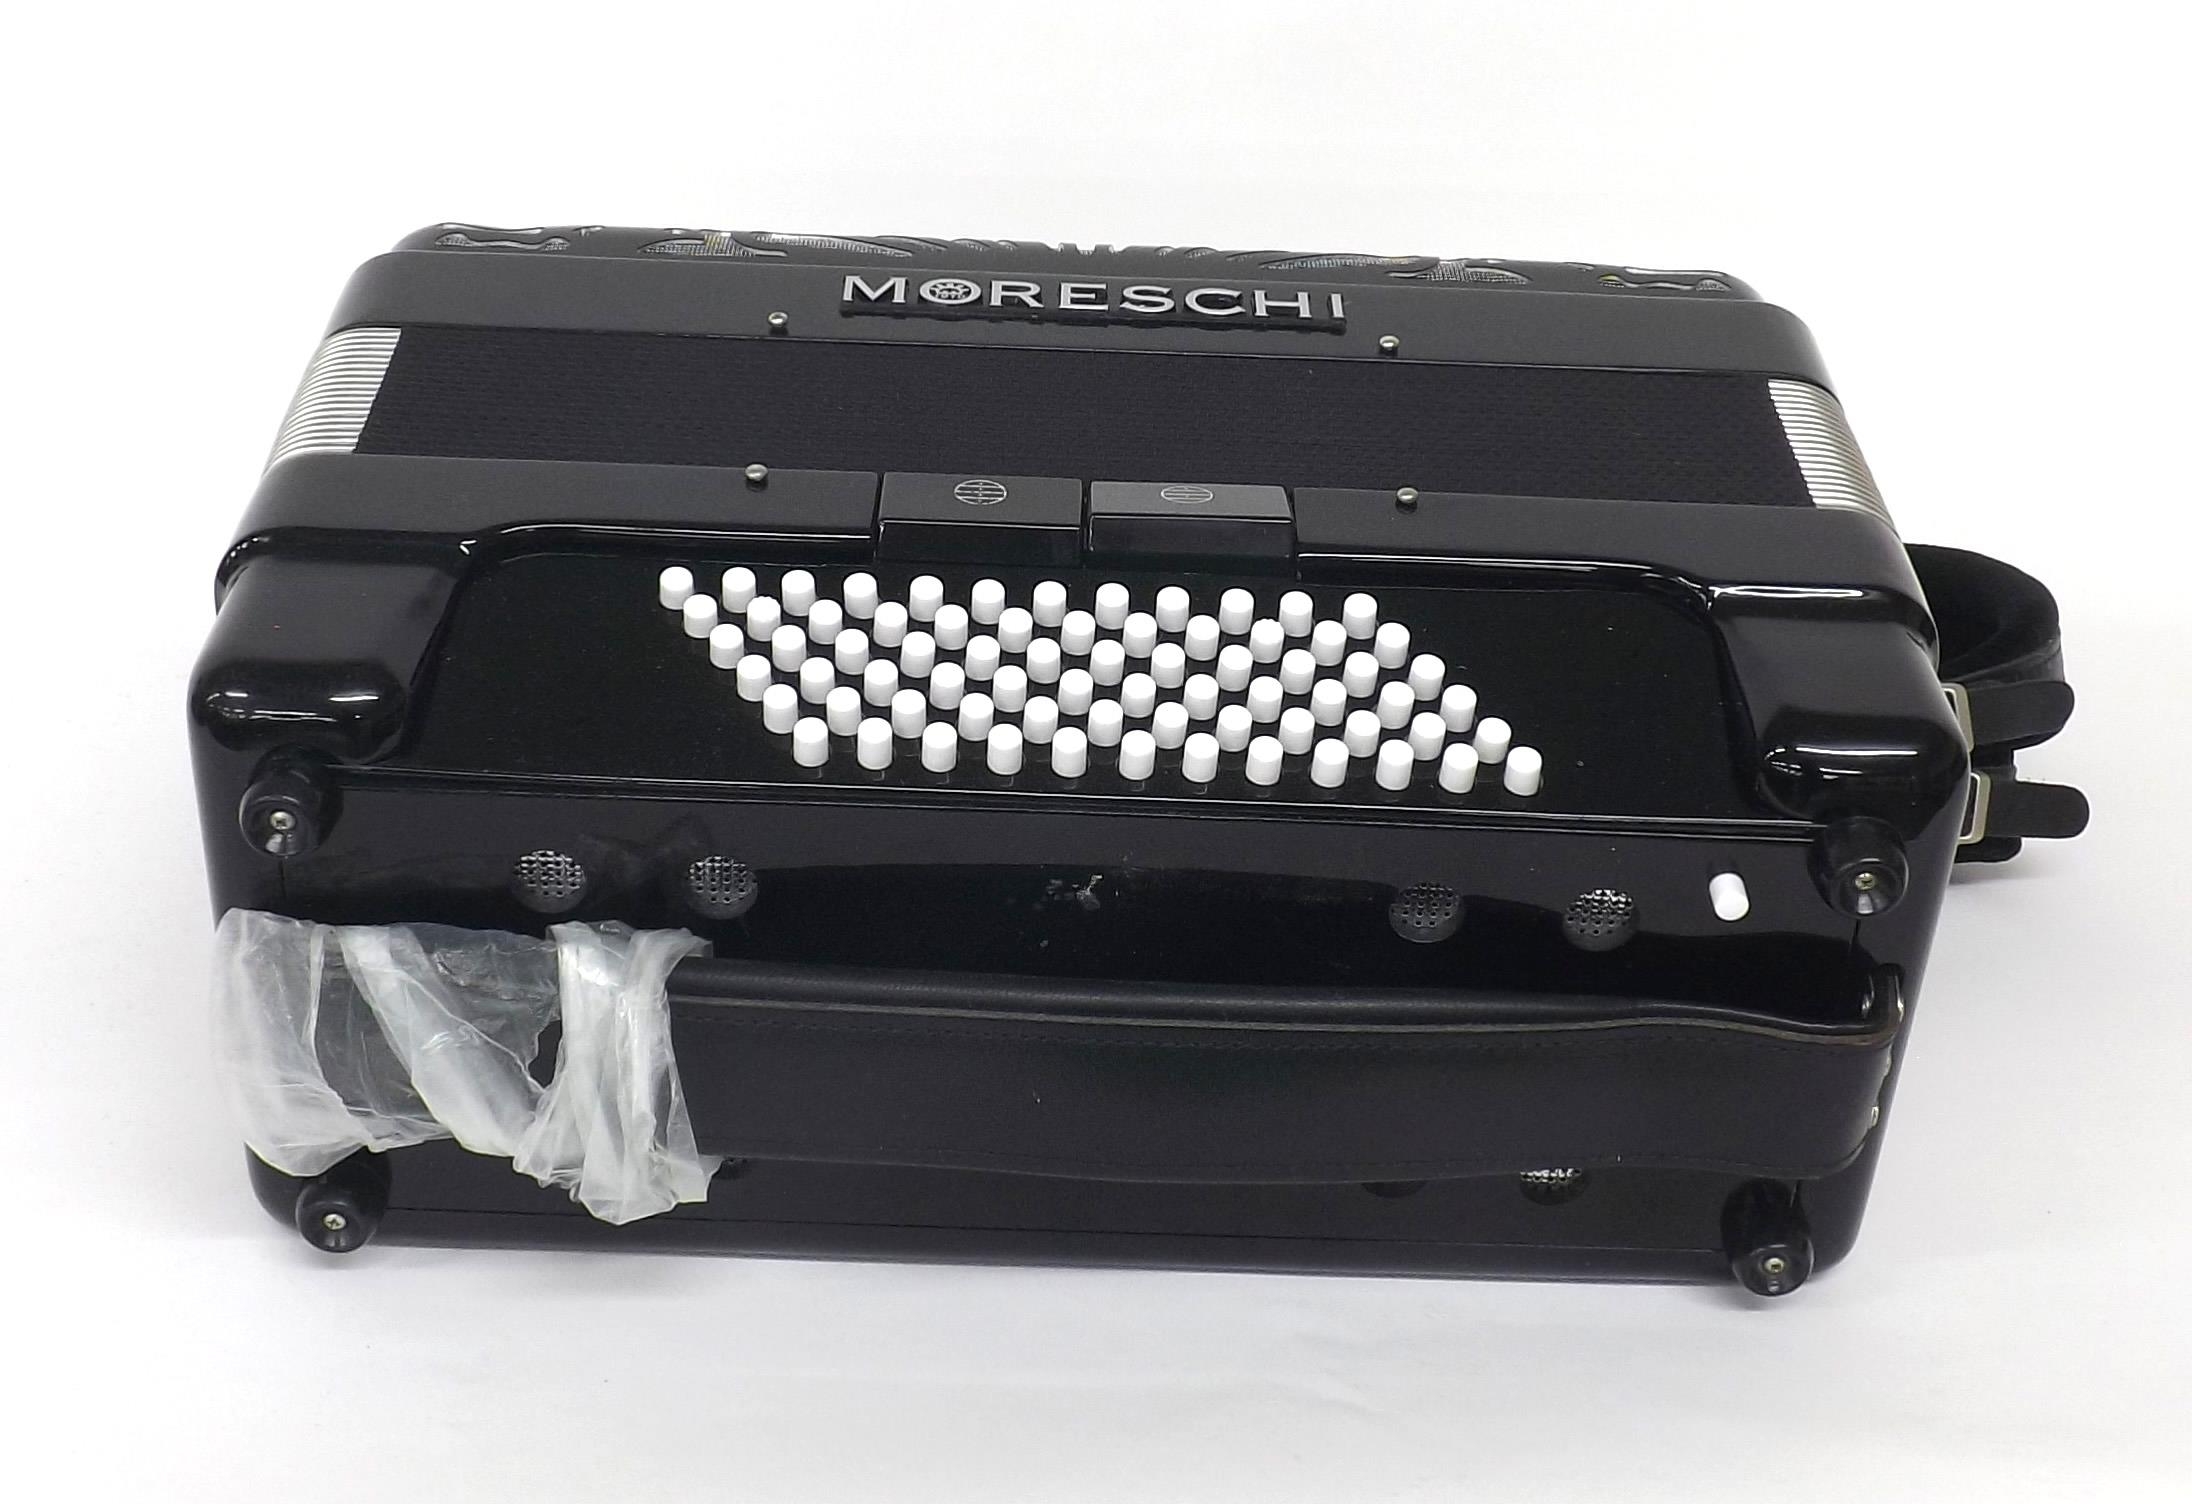 Moreschi piano accordion with seventy-two buttons and five switches, black finish, soft case - Image 2 of 2